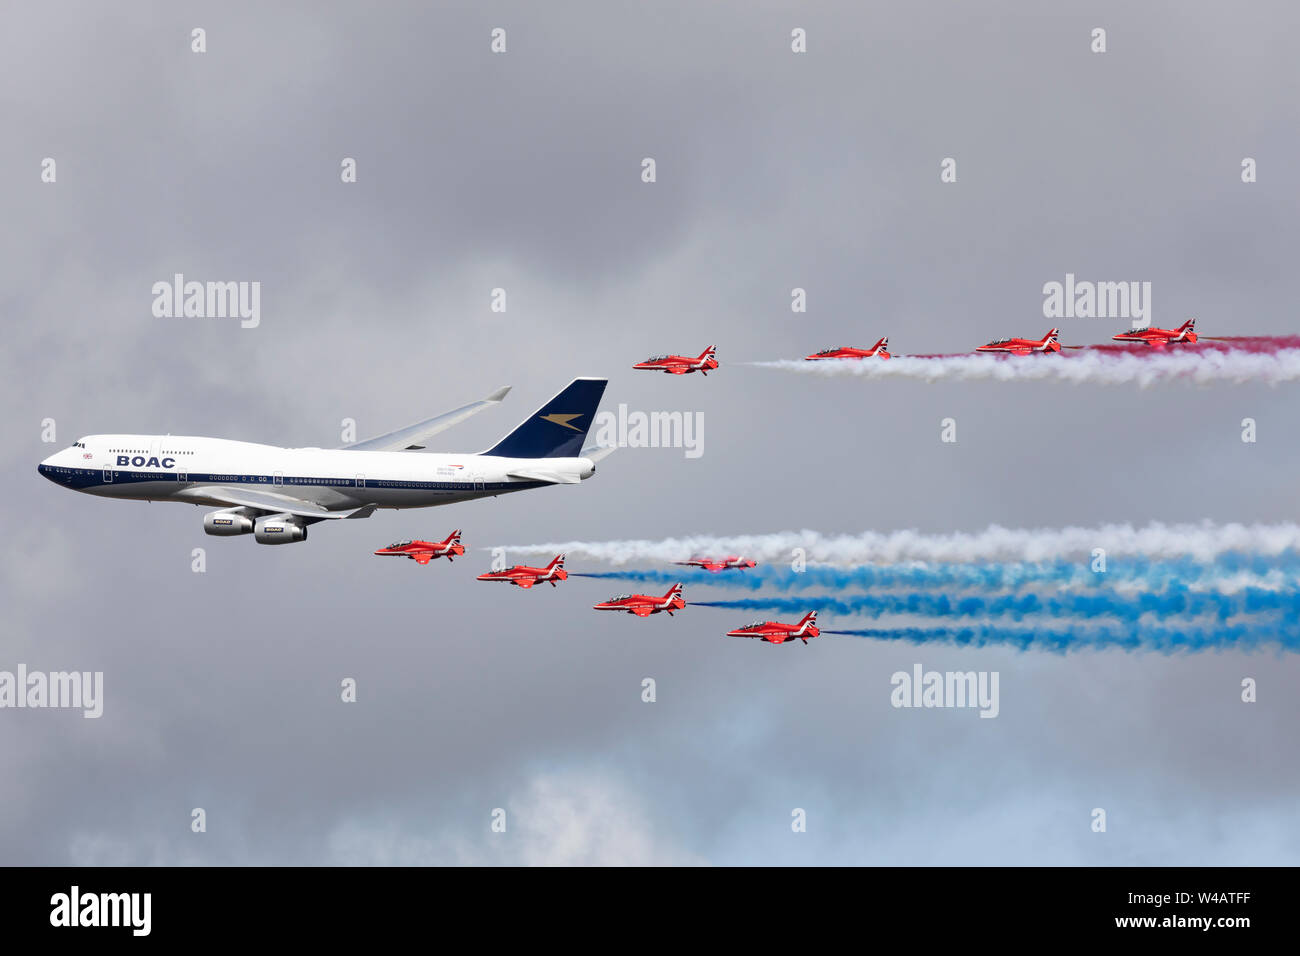 Red Arrows formation flight with British Airways BOAC livery Boeing 747 flying on July 20th 2019 at RIAT 2019, RAF Fairford, Gloucestershire, UK Stock Photo